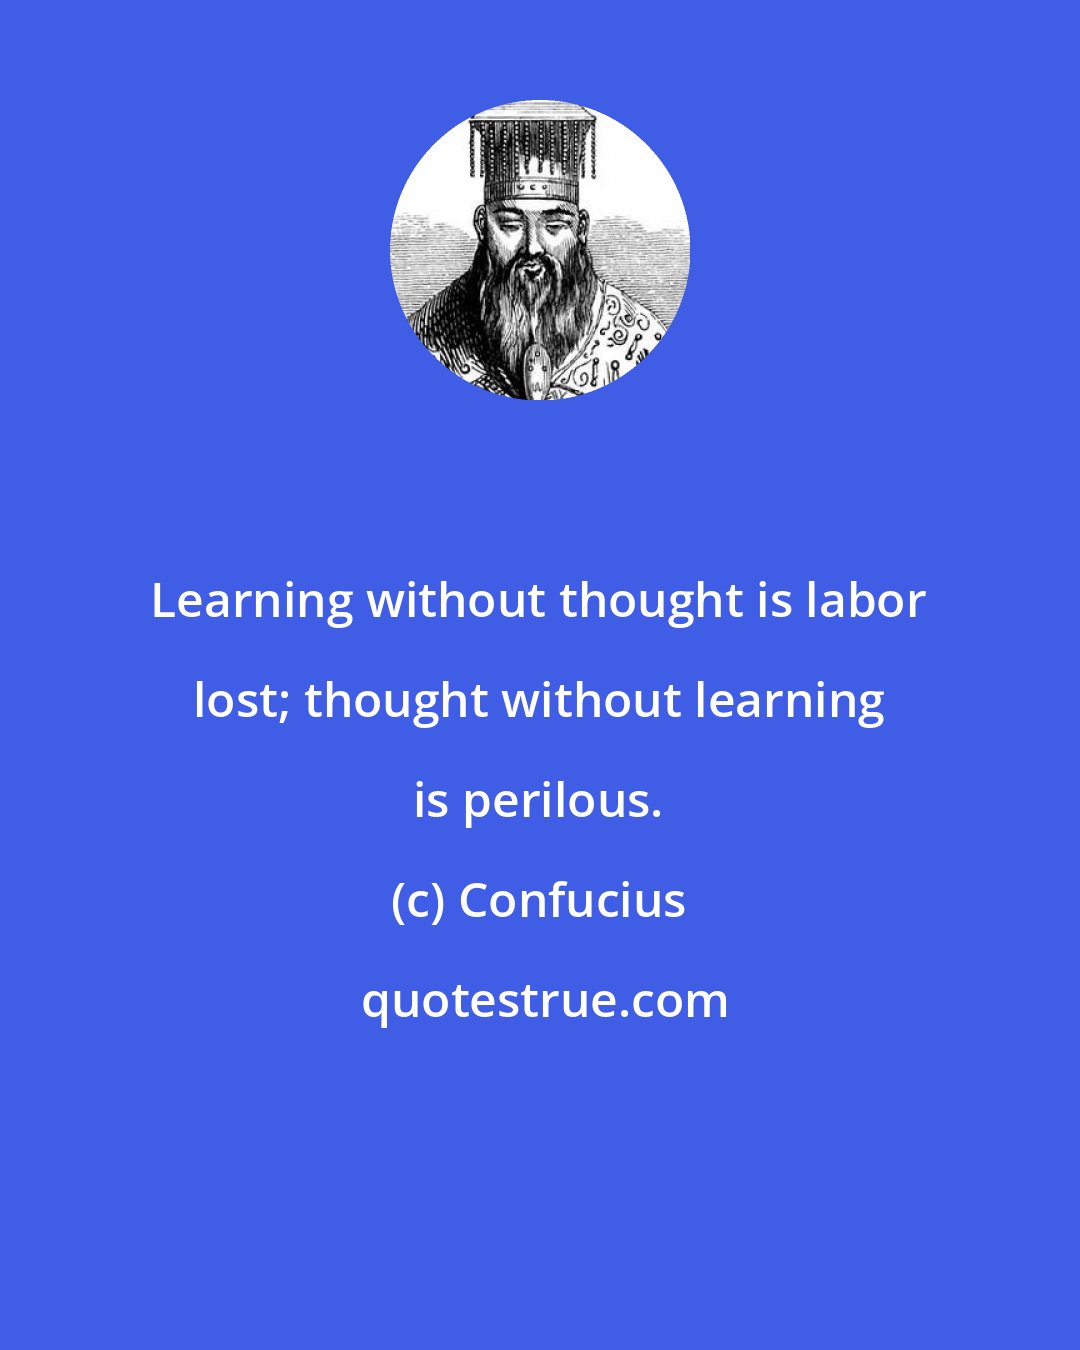 Confucius: Learning without thought is labor lost; thought without learning is perilous.